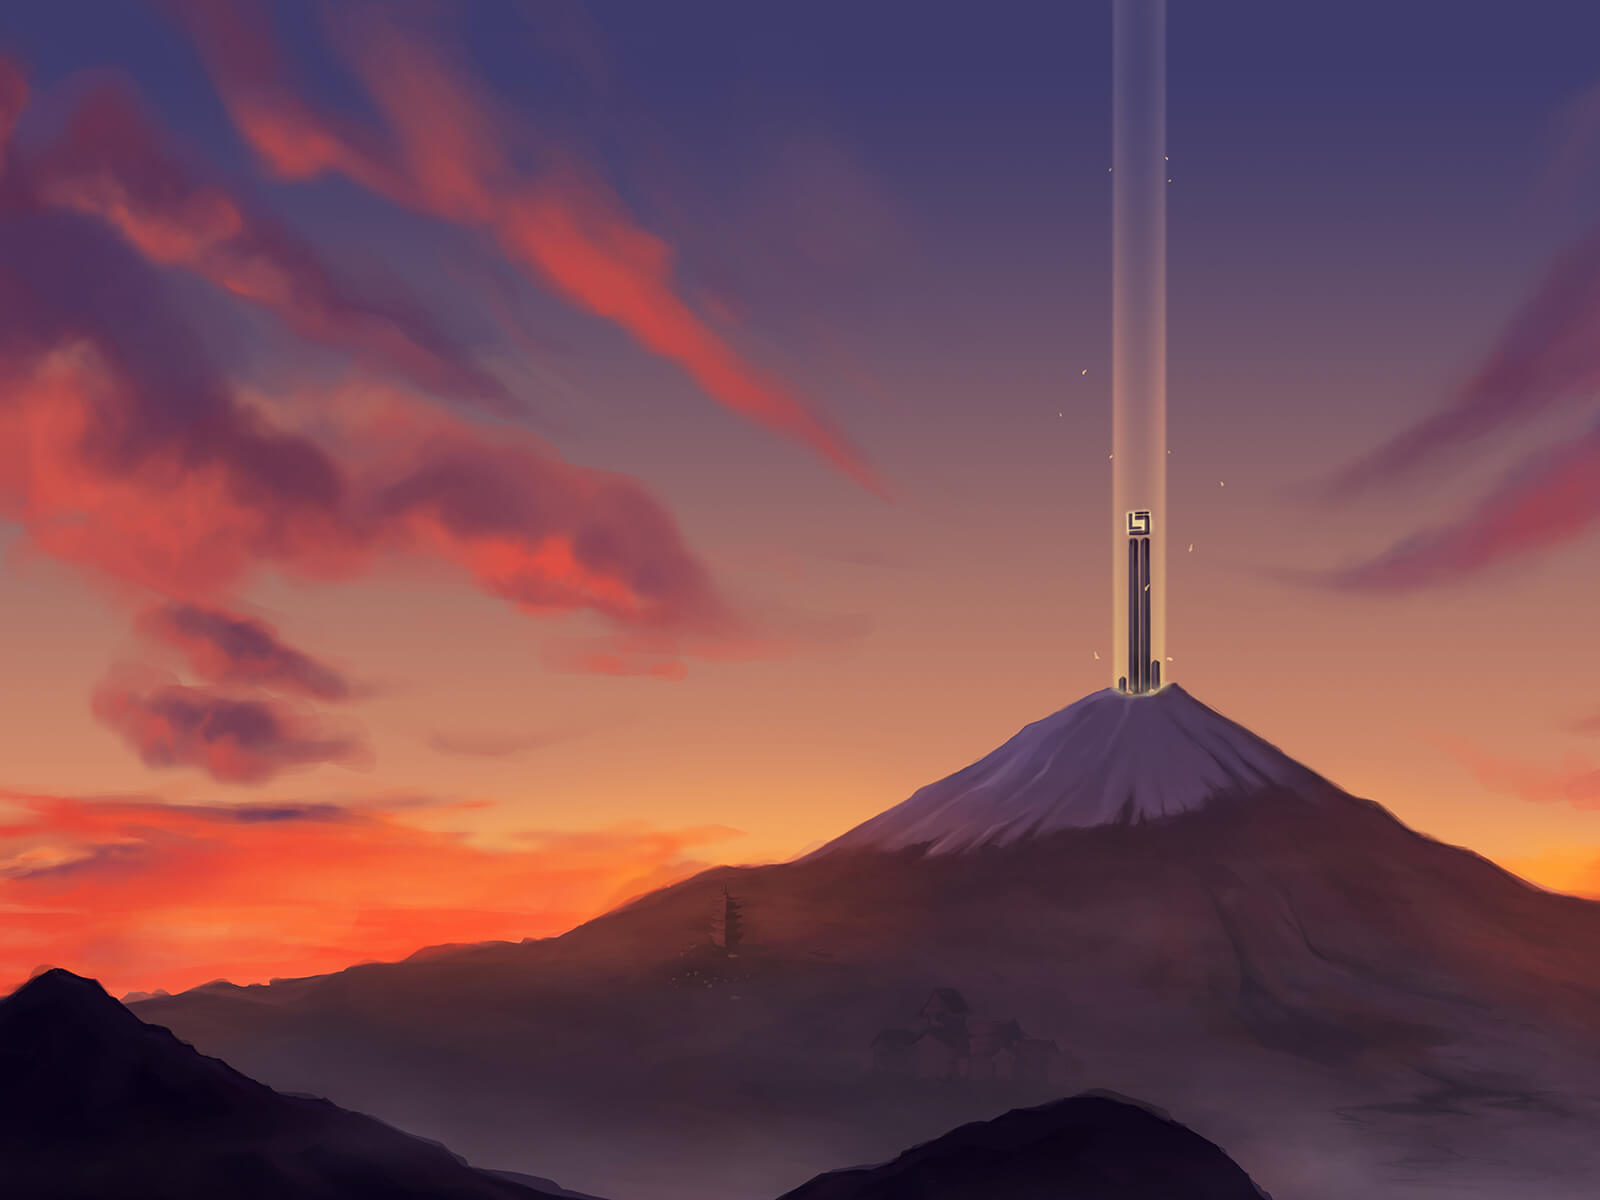 Mount Fuji from a distance during a fiery-red sunset. At its peak, a tall black spire shoots a beacon of light into the air.